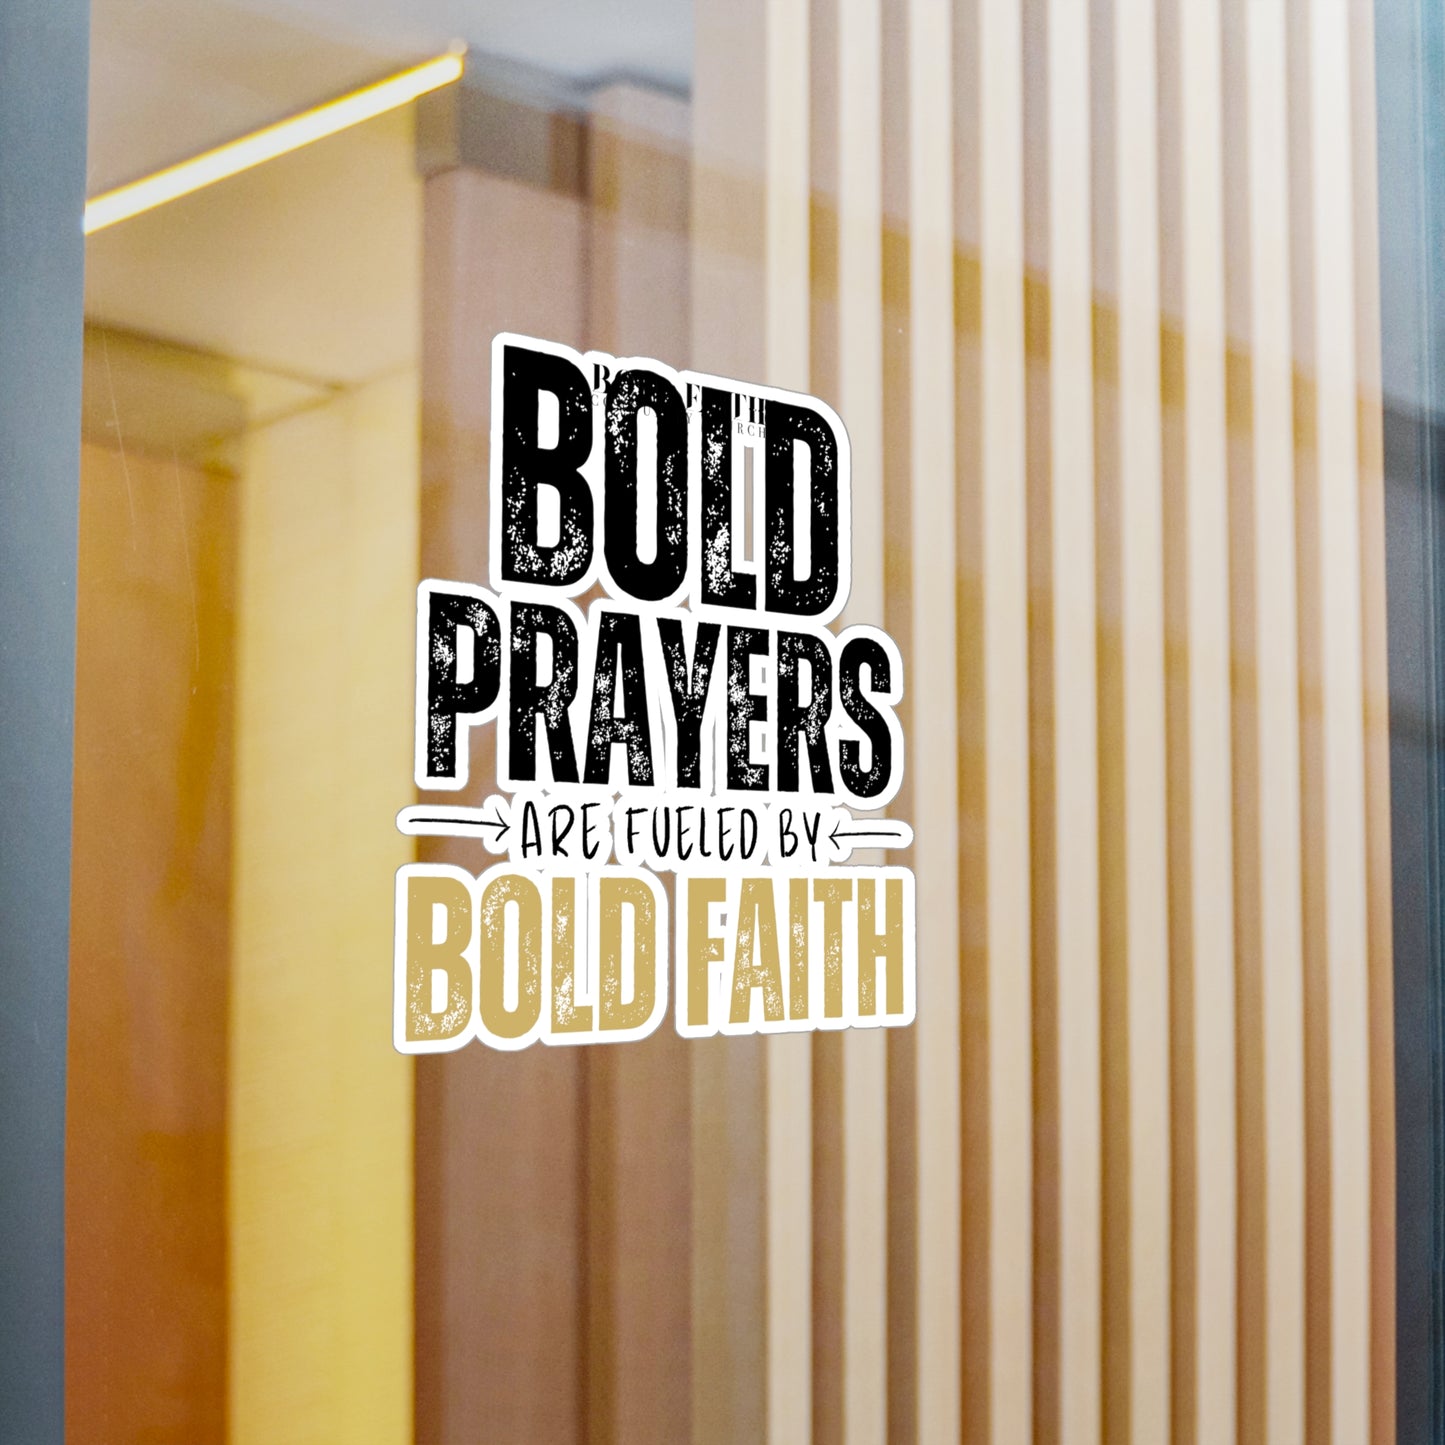 Bold Prayers Are Fueled by Bold Faith Kiss-Cut Vinyl Sticker or Decals